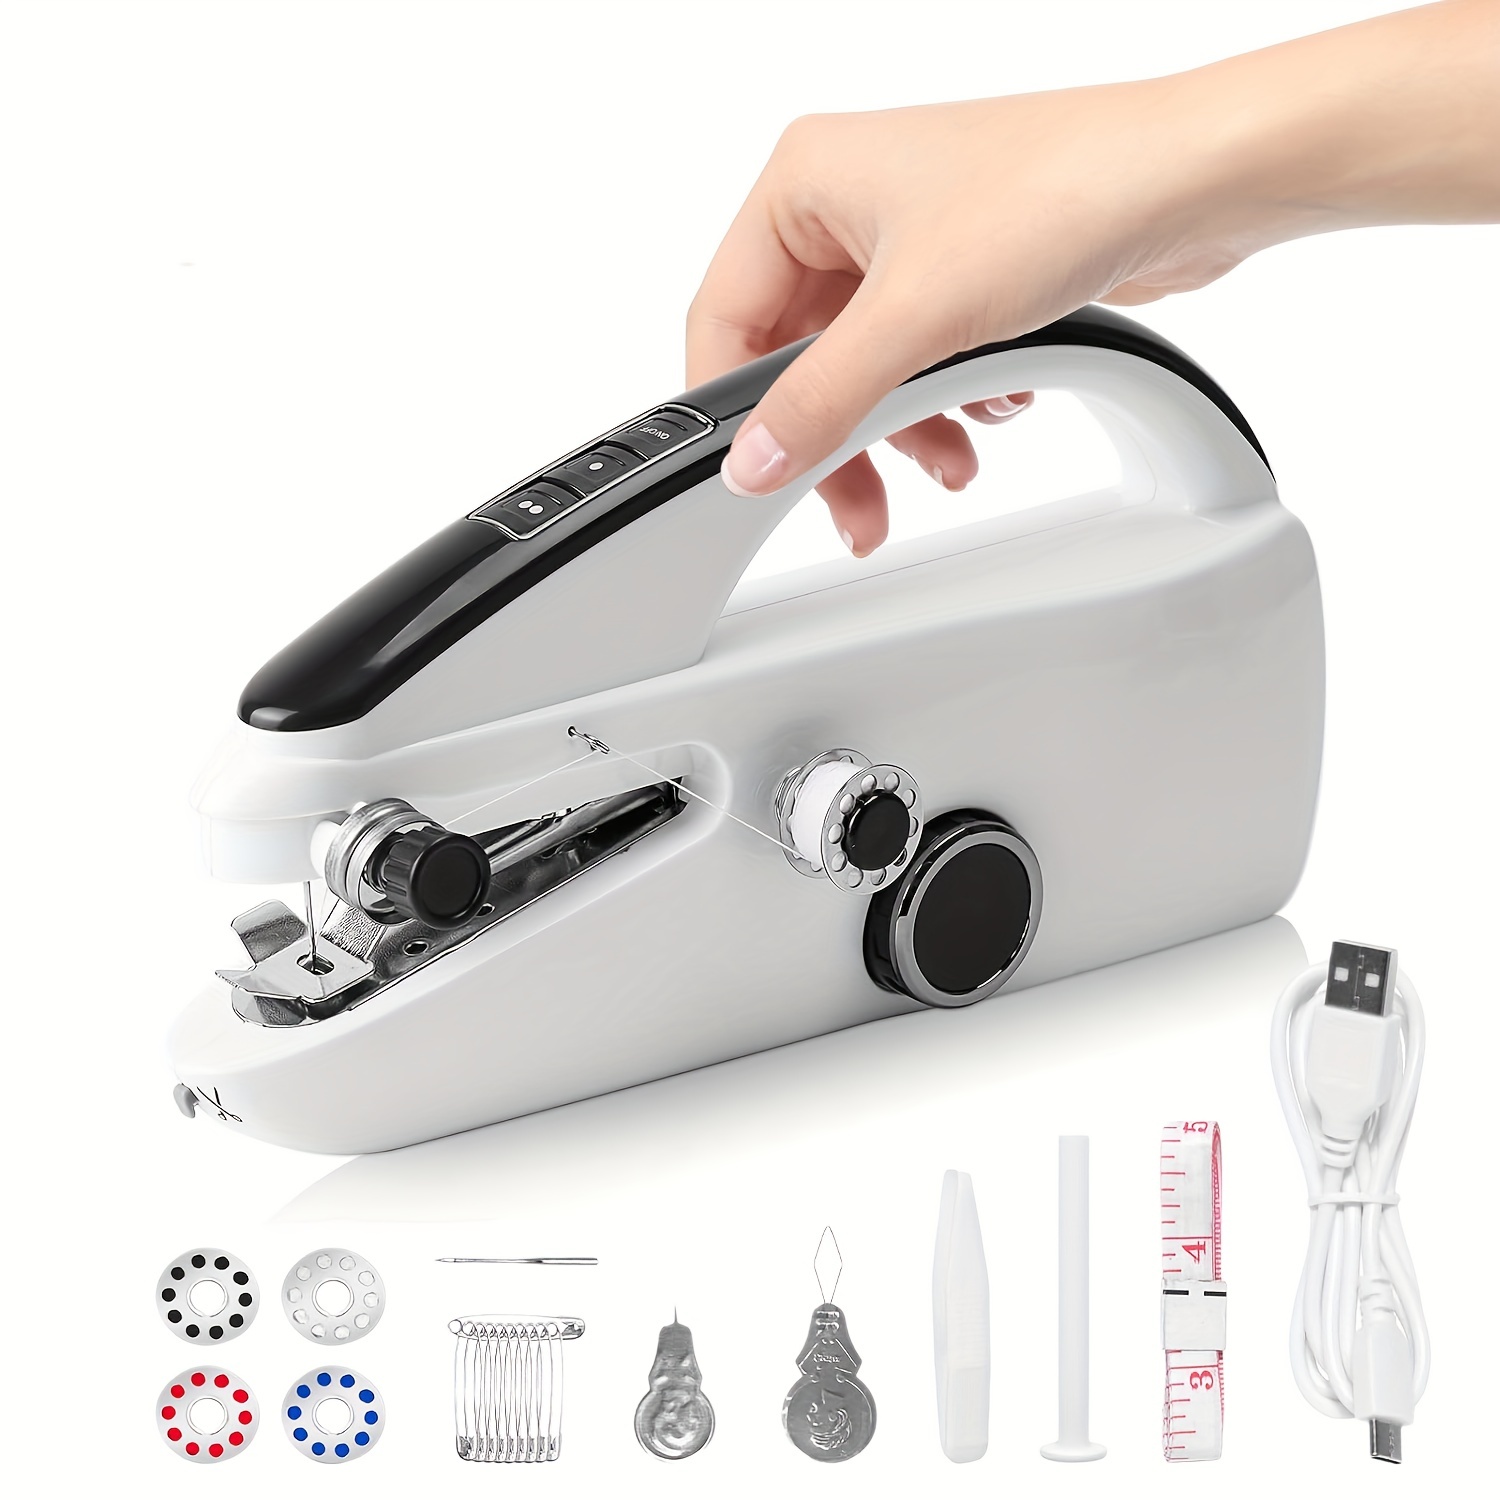 

Portable Handheld Sewing Machine Kit: User-friendly Mini Sewing Machine For Quick Mending, Suitable For Various Fabrics - Perfect For Home Diy And Travel Repairs